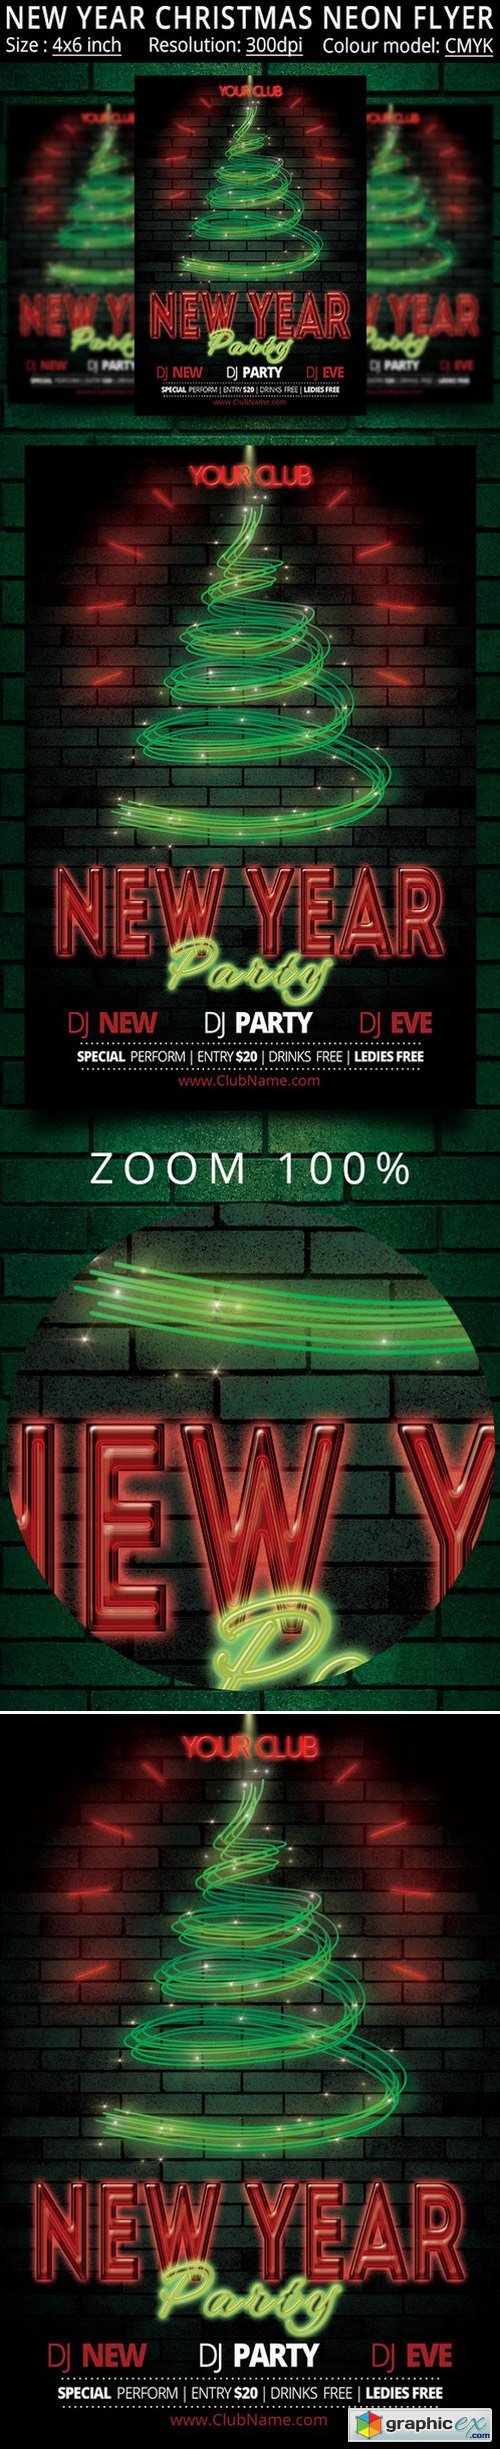 New Year Christmas Neon Party Flyer